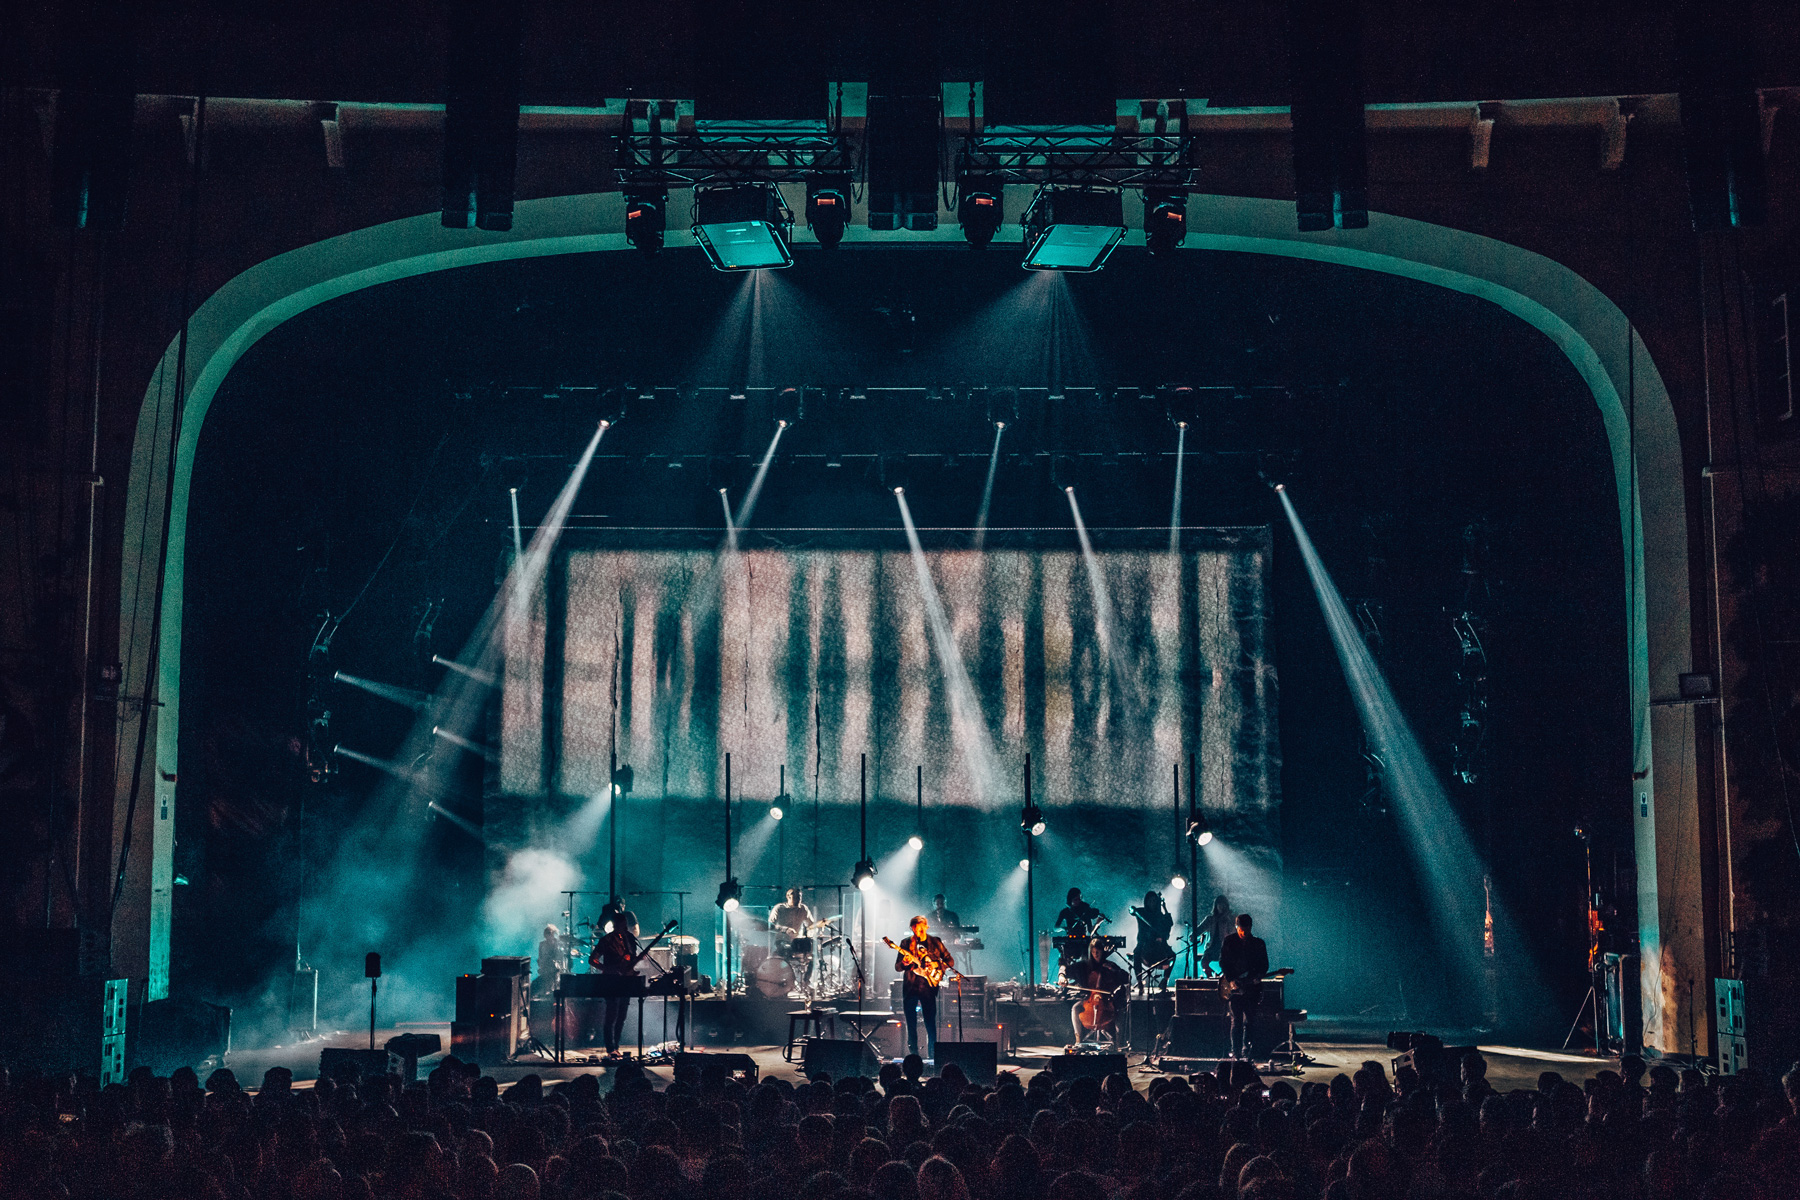 Ben Howard moves into immersive sound with L-ISA